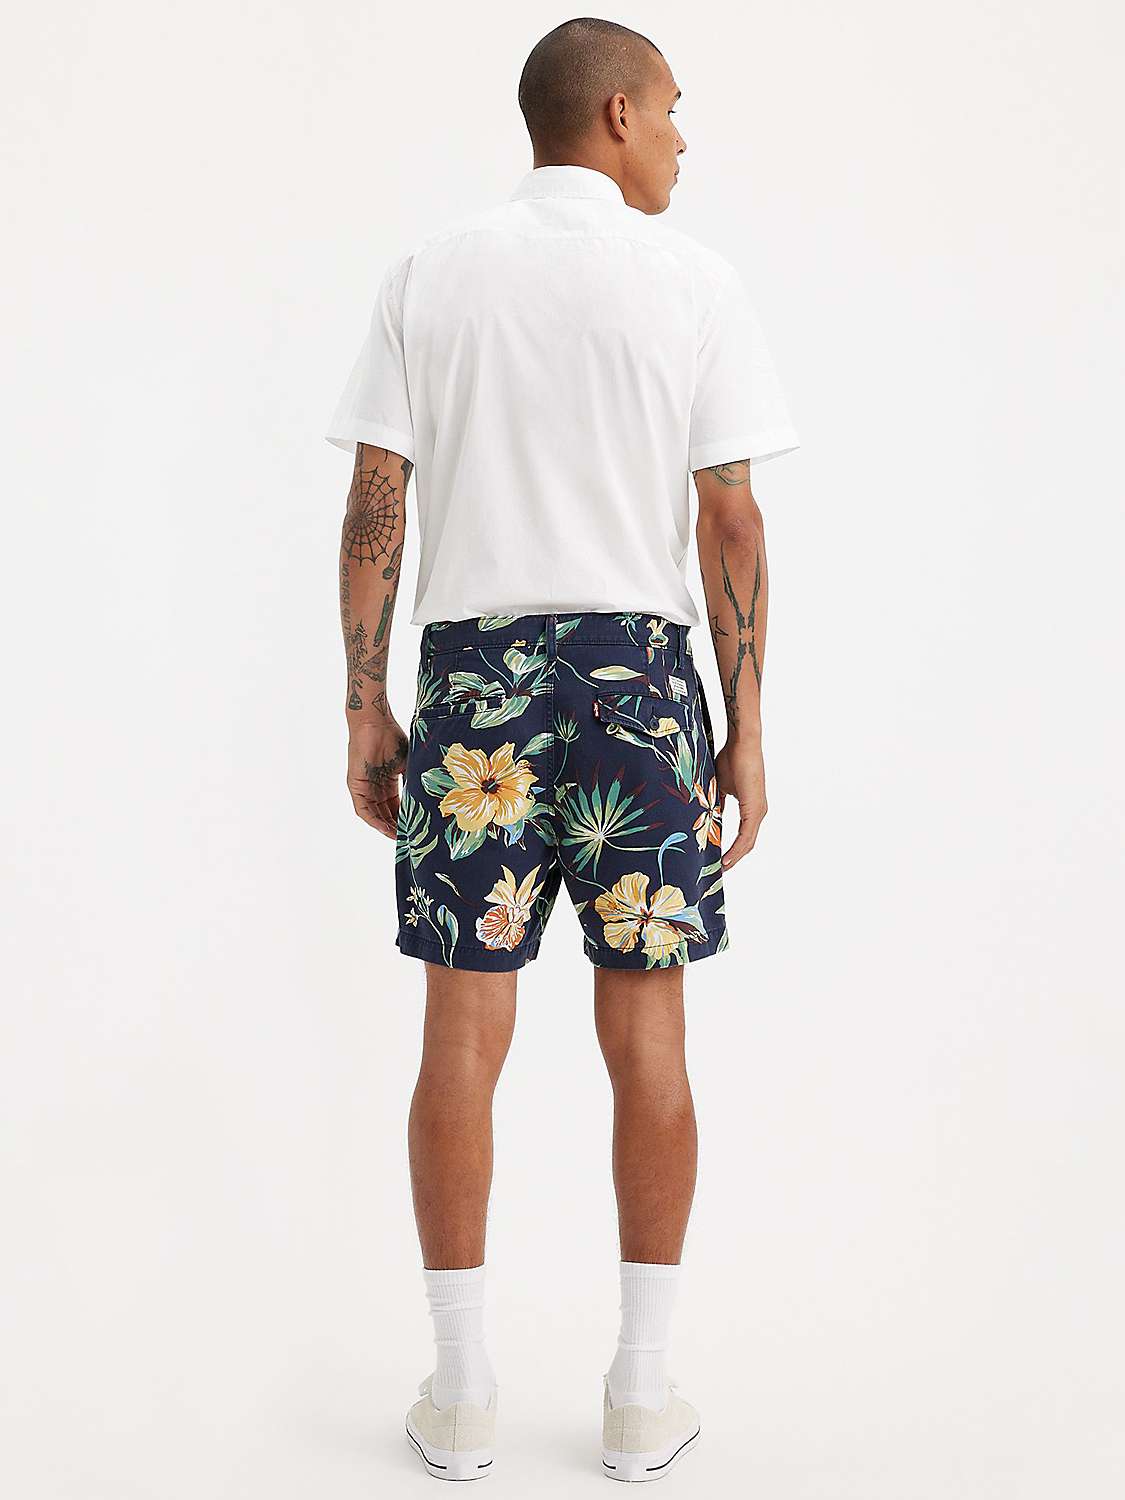 Buy Levi's XX Authentic Chino Shorts, Navy/Multi Online at johnlewis.com